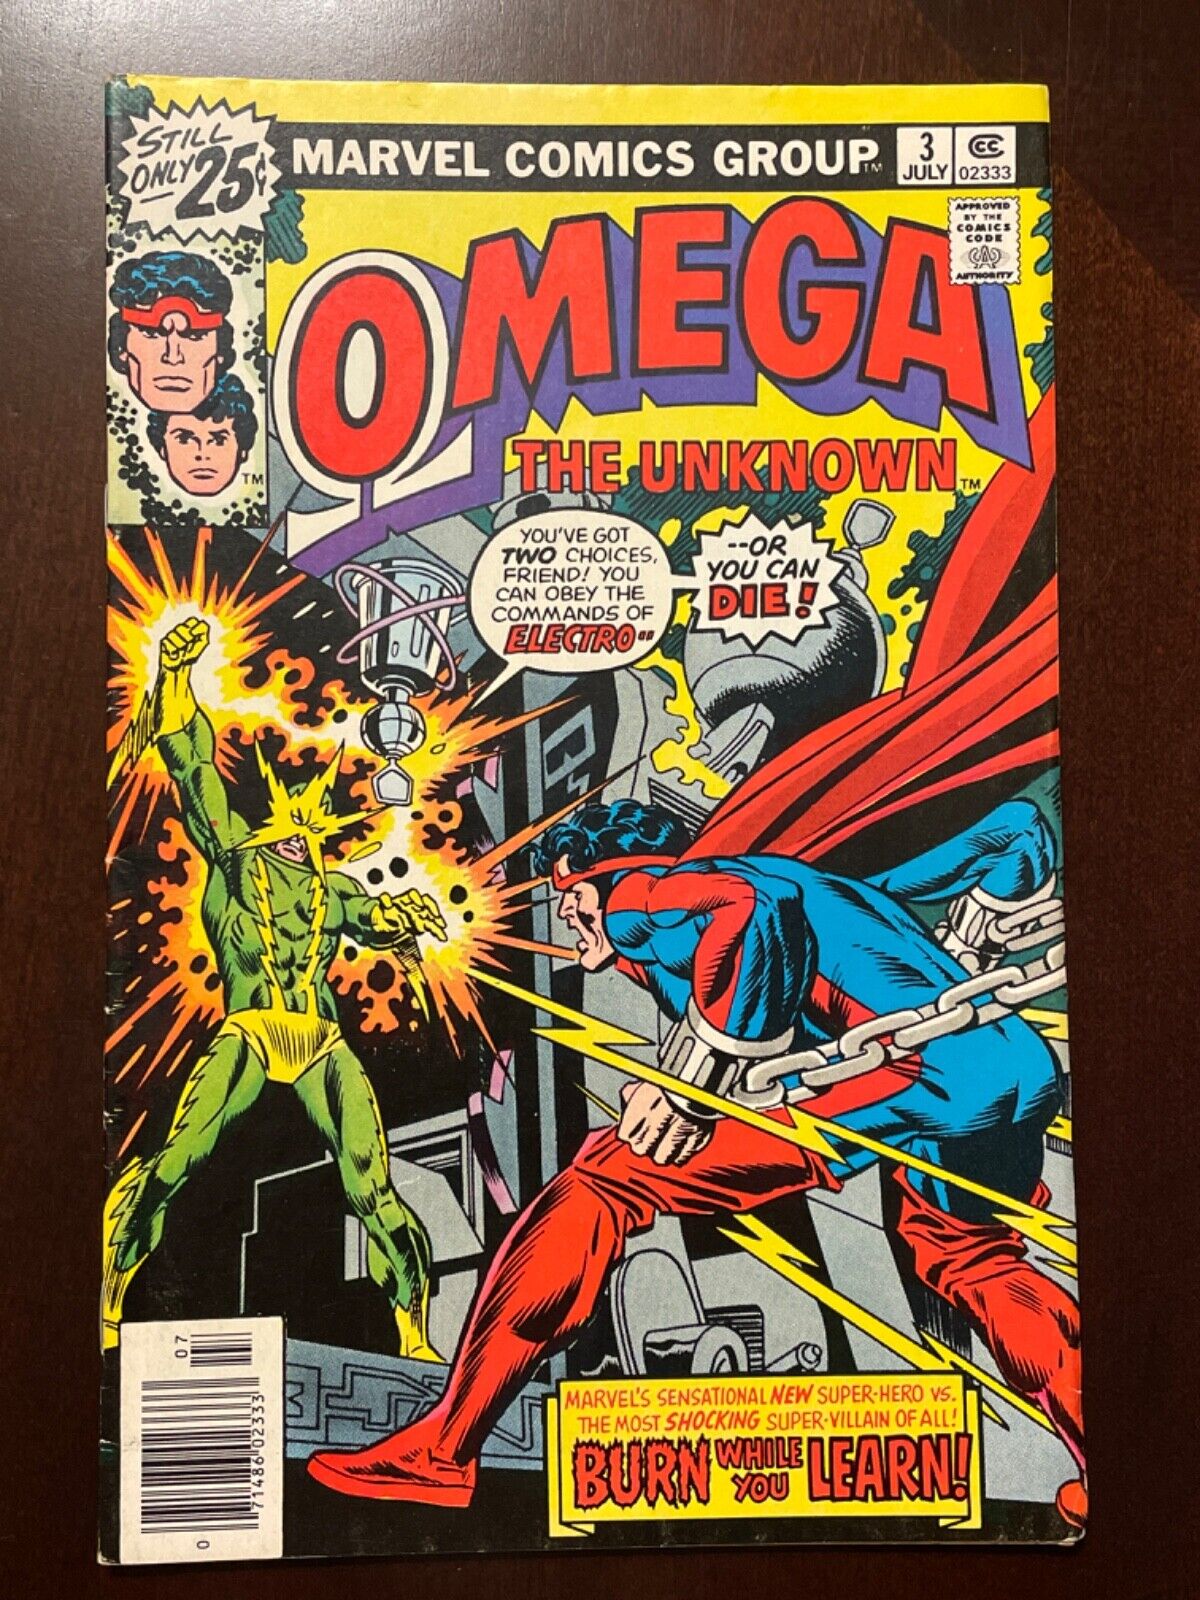 Omega The Unknown #3 vol 1 (Marvel, 1976) high grade Contains MVS B100 Stan Lee